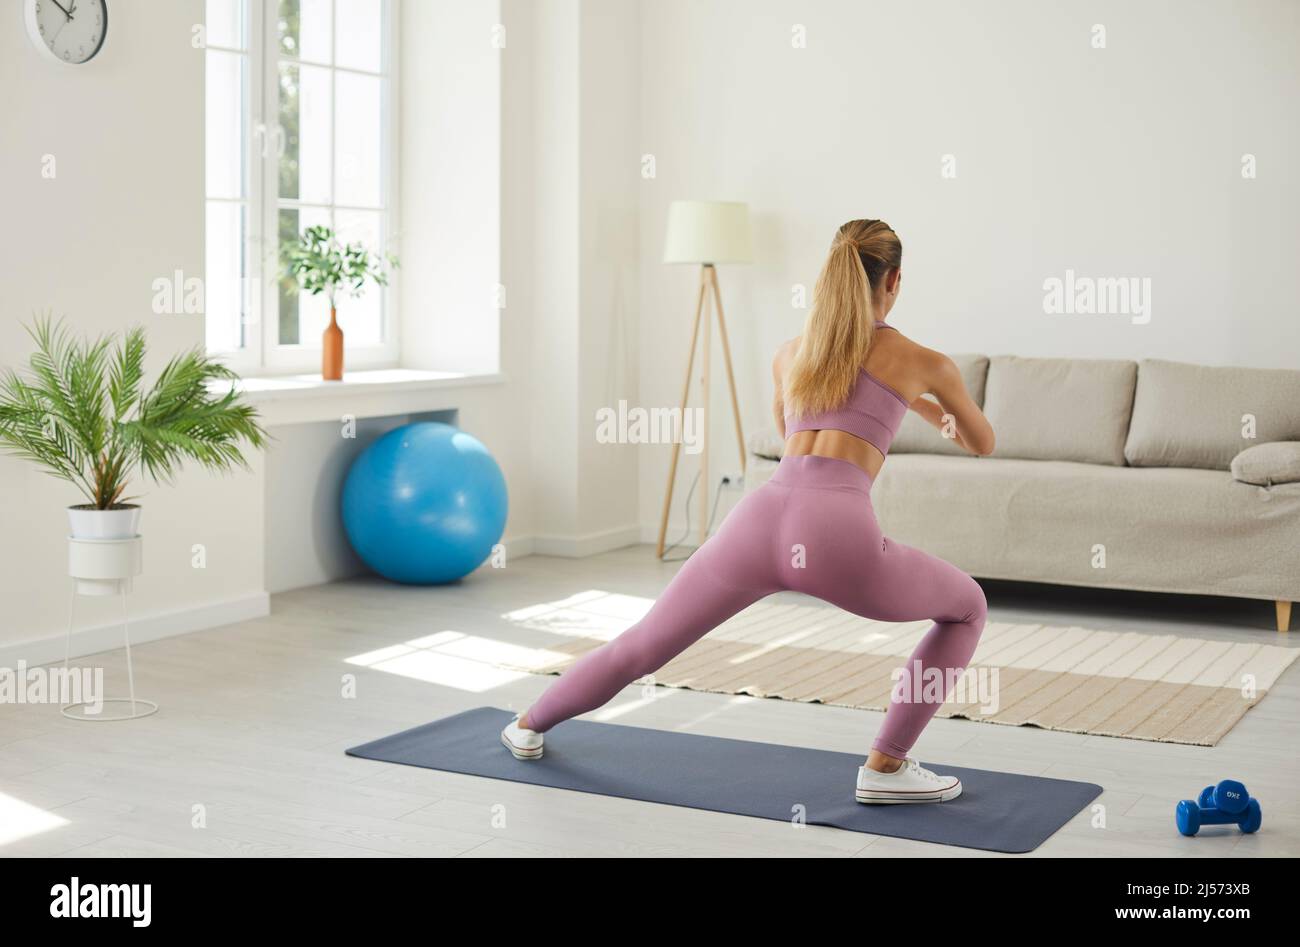 Young woman does morning exercises and stretching during sports training at home. Stock Photo